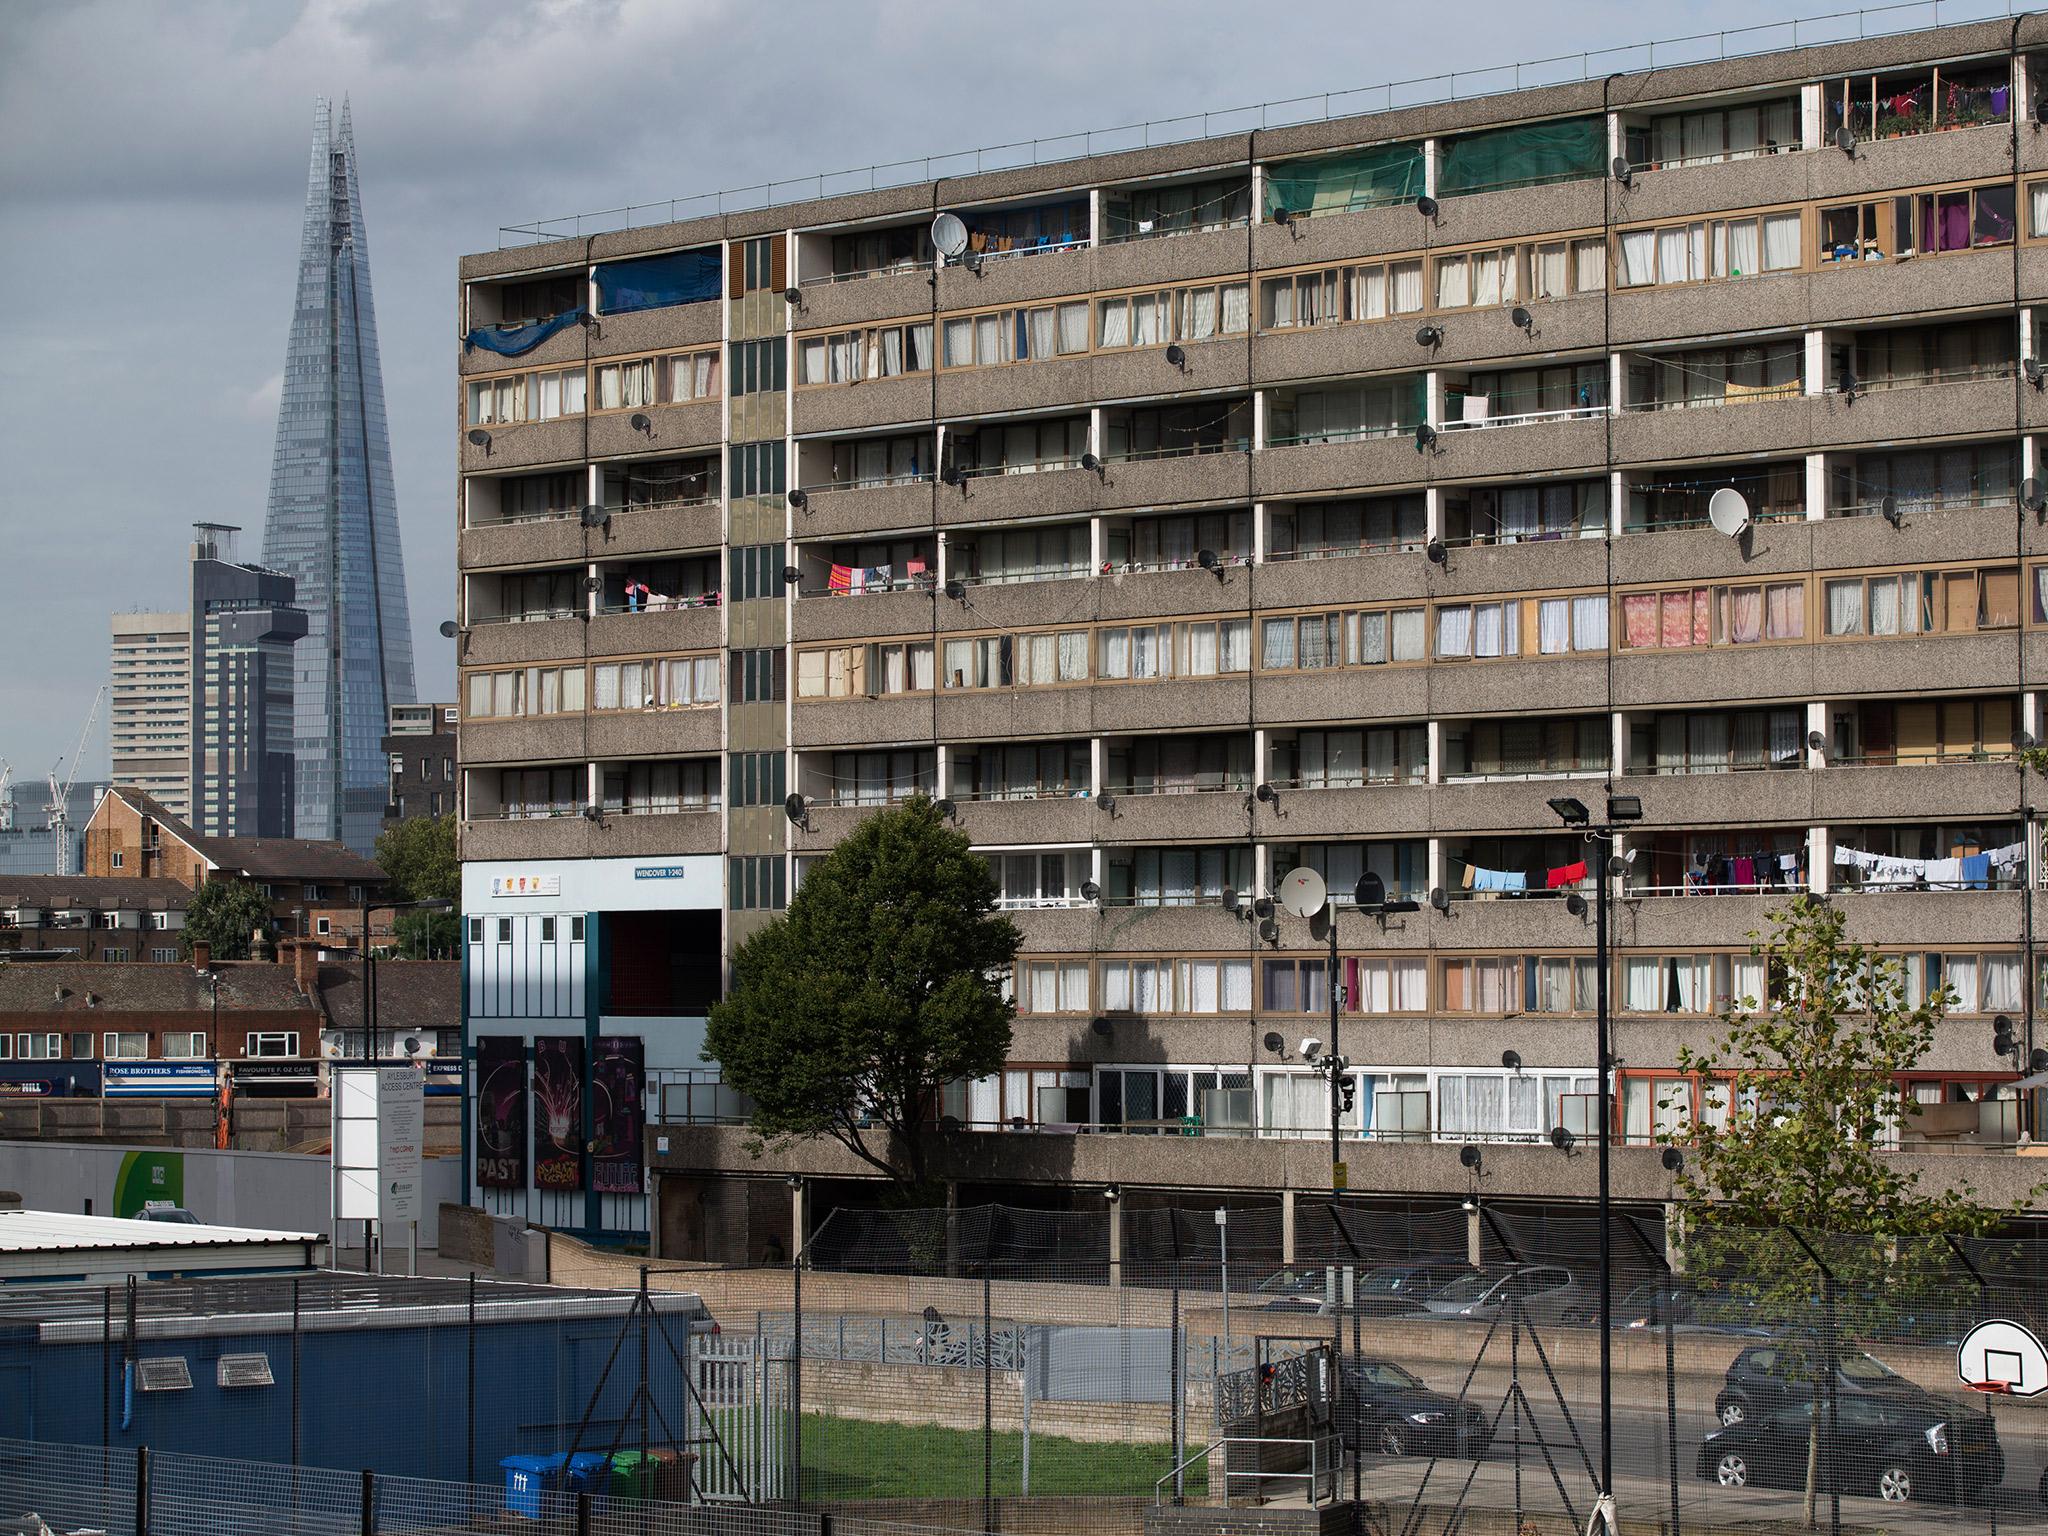 ‘This lays bare the haemorrhage of low-cost housing under the Conservatives,’ say Labour